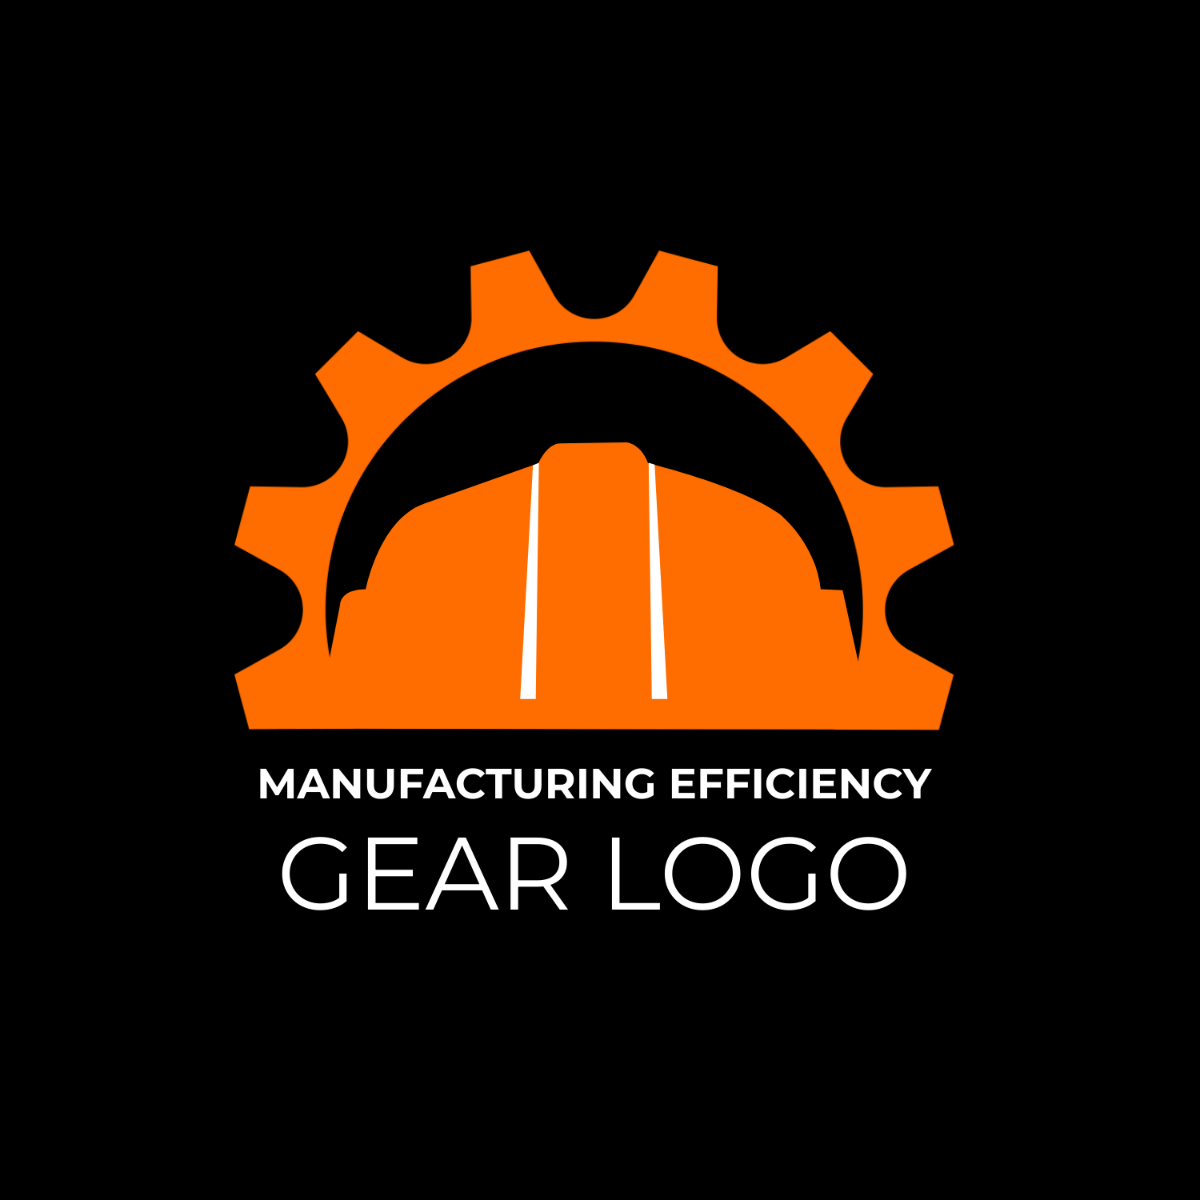 Manufacturing Efficiency Gear Logo Template